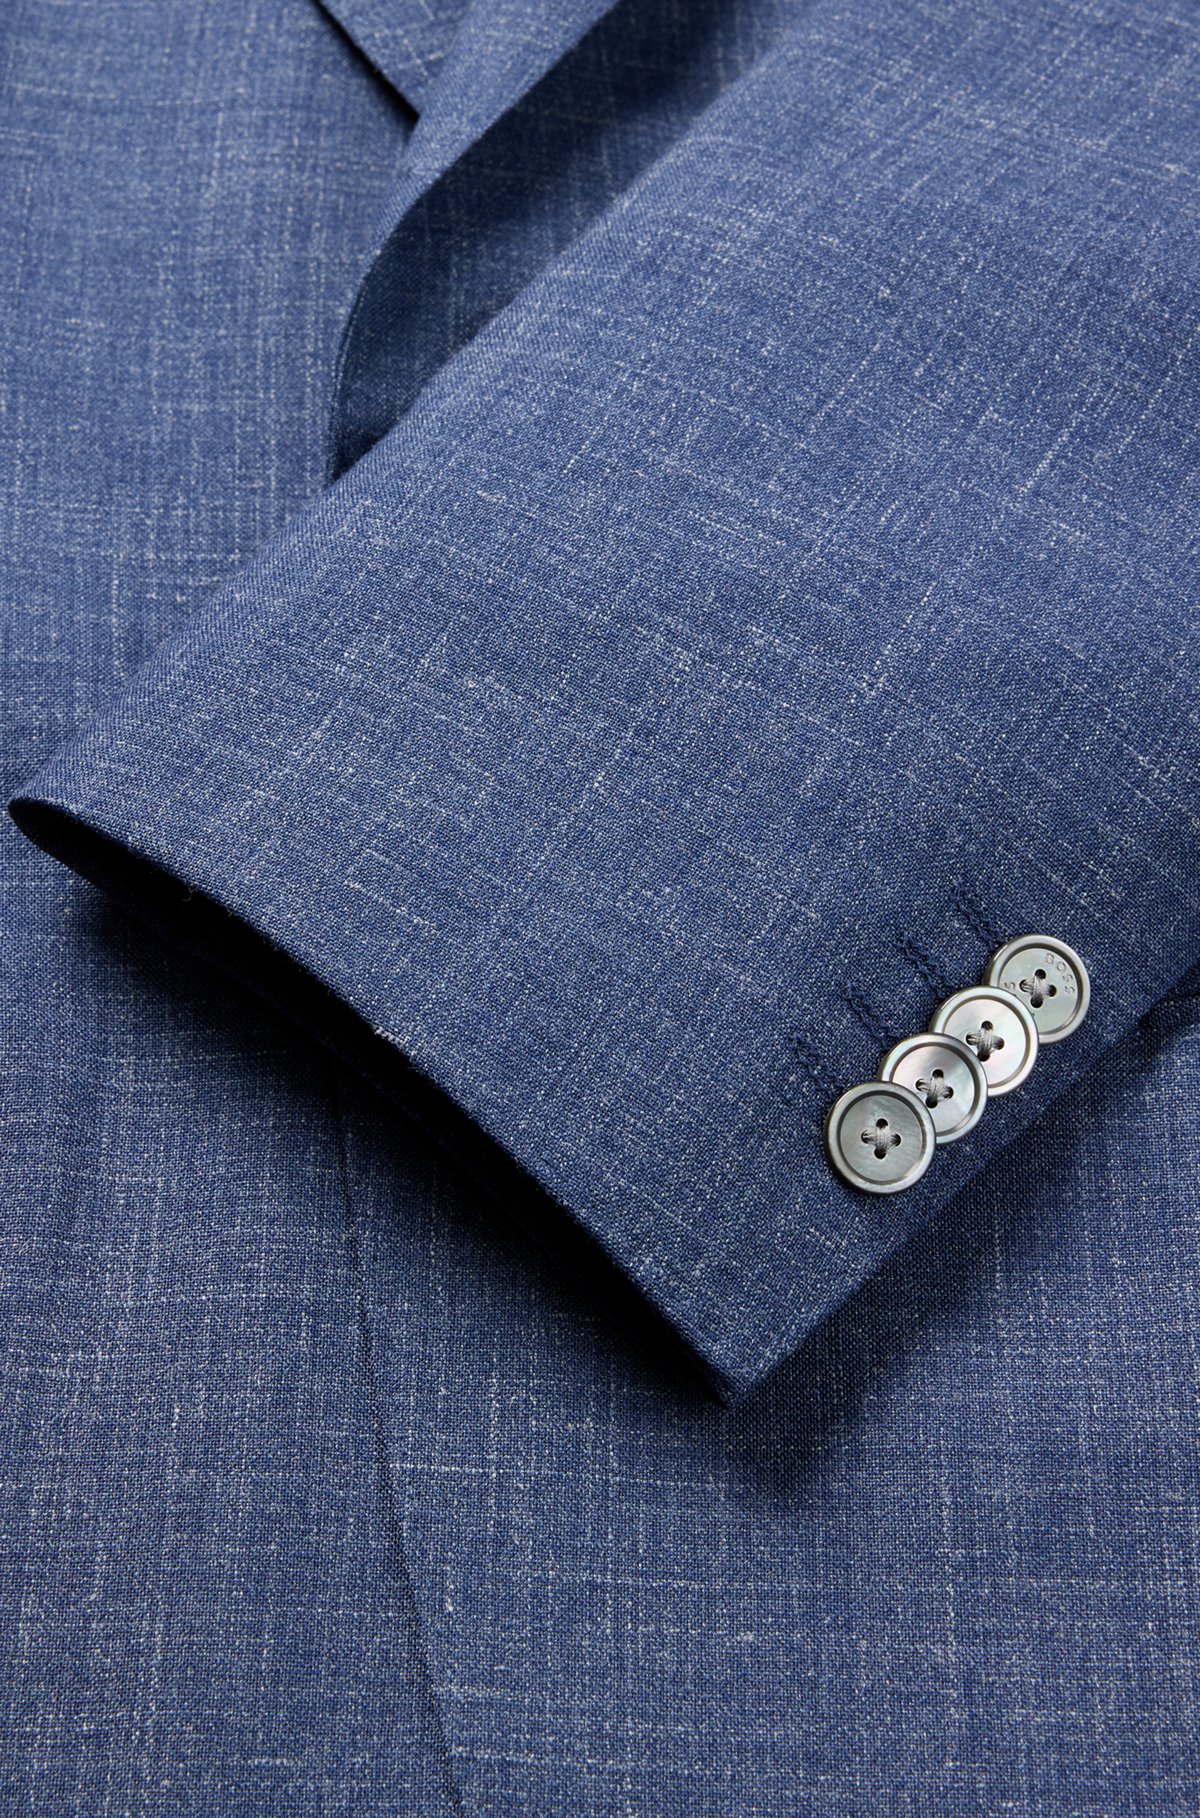 BOSS - Slim-fit suit in wool, Tussah silk and linen